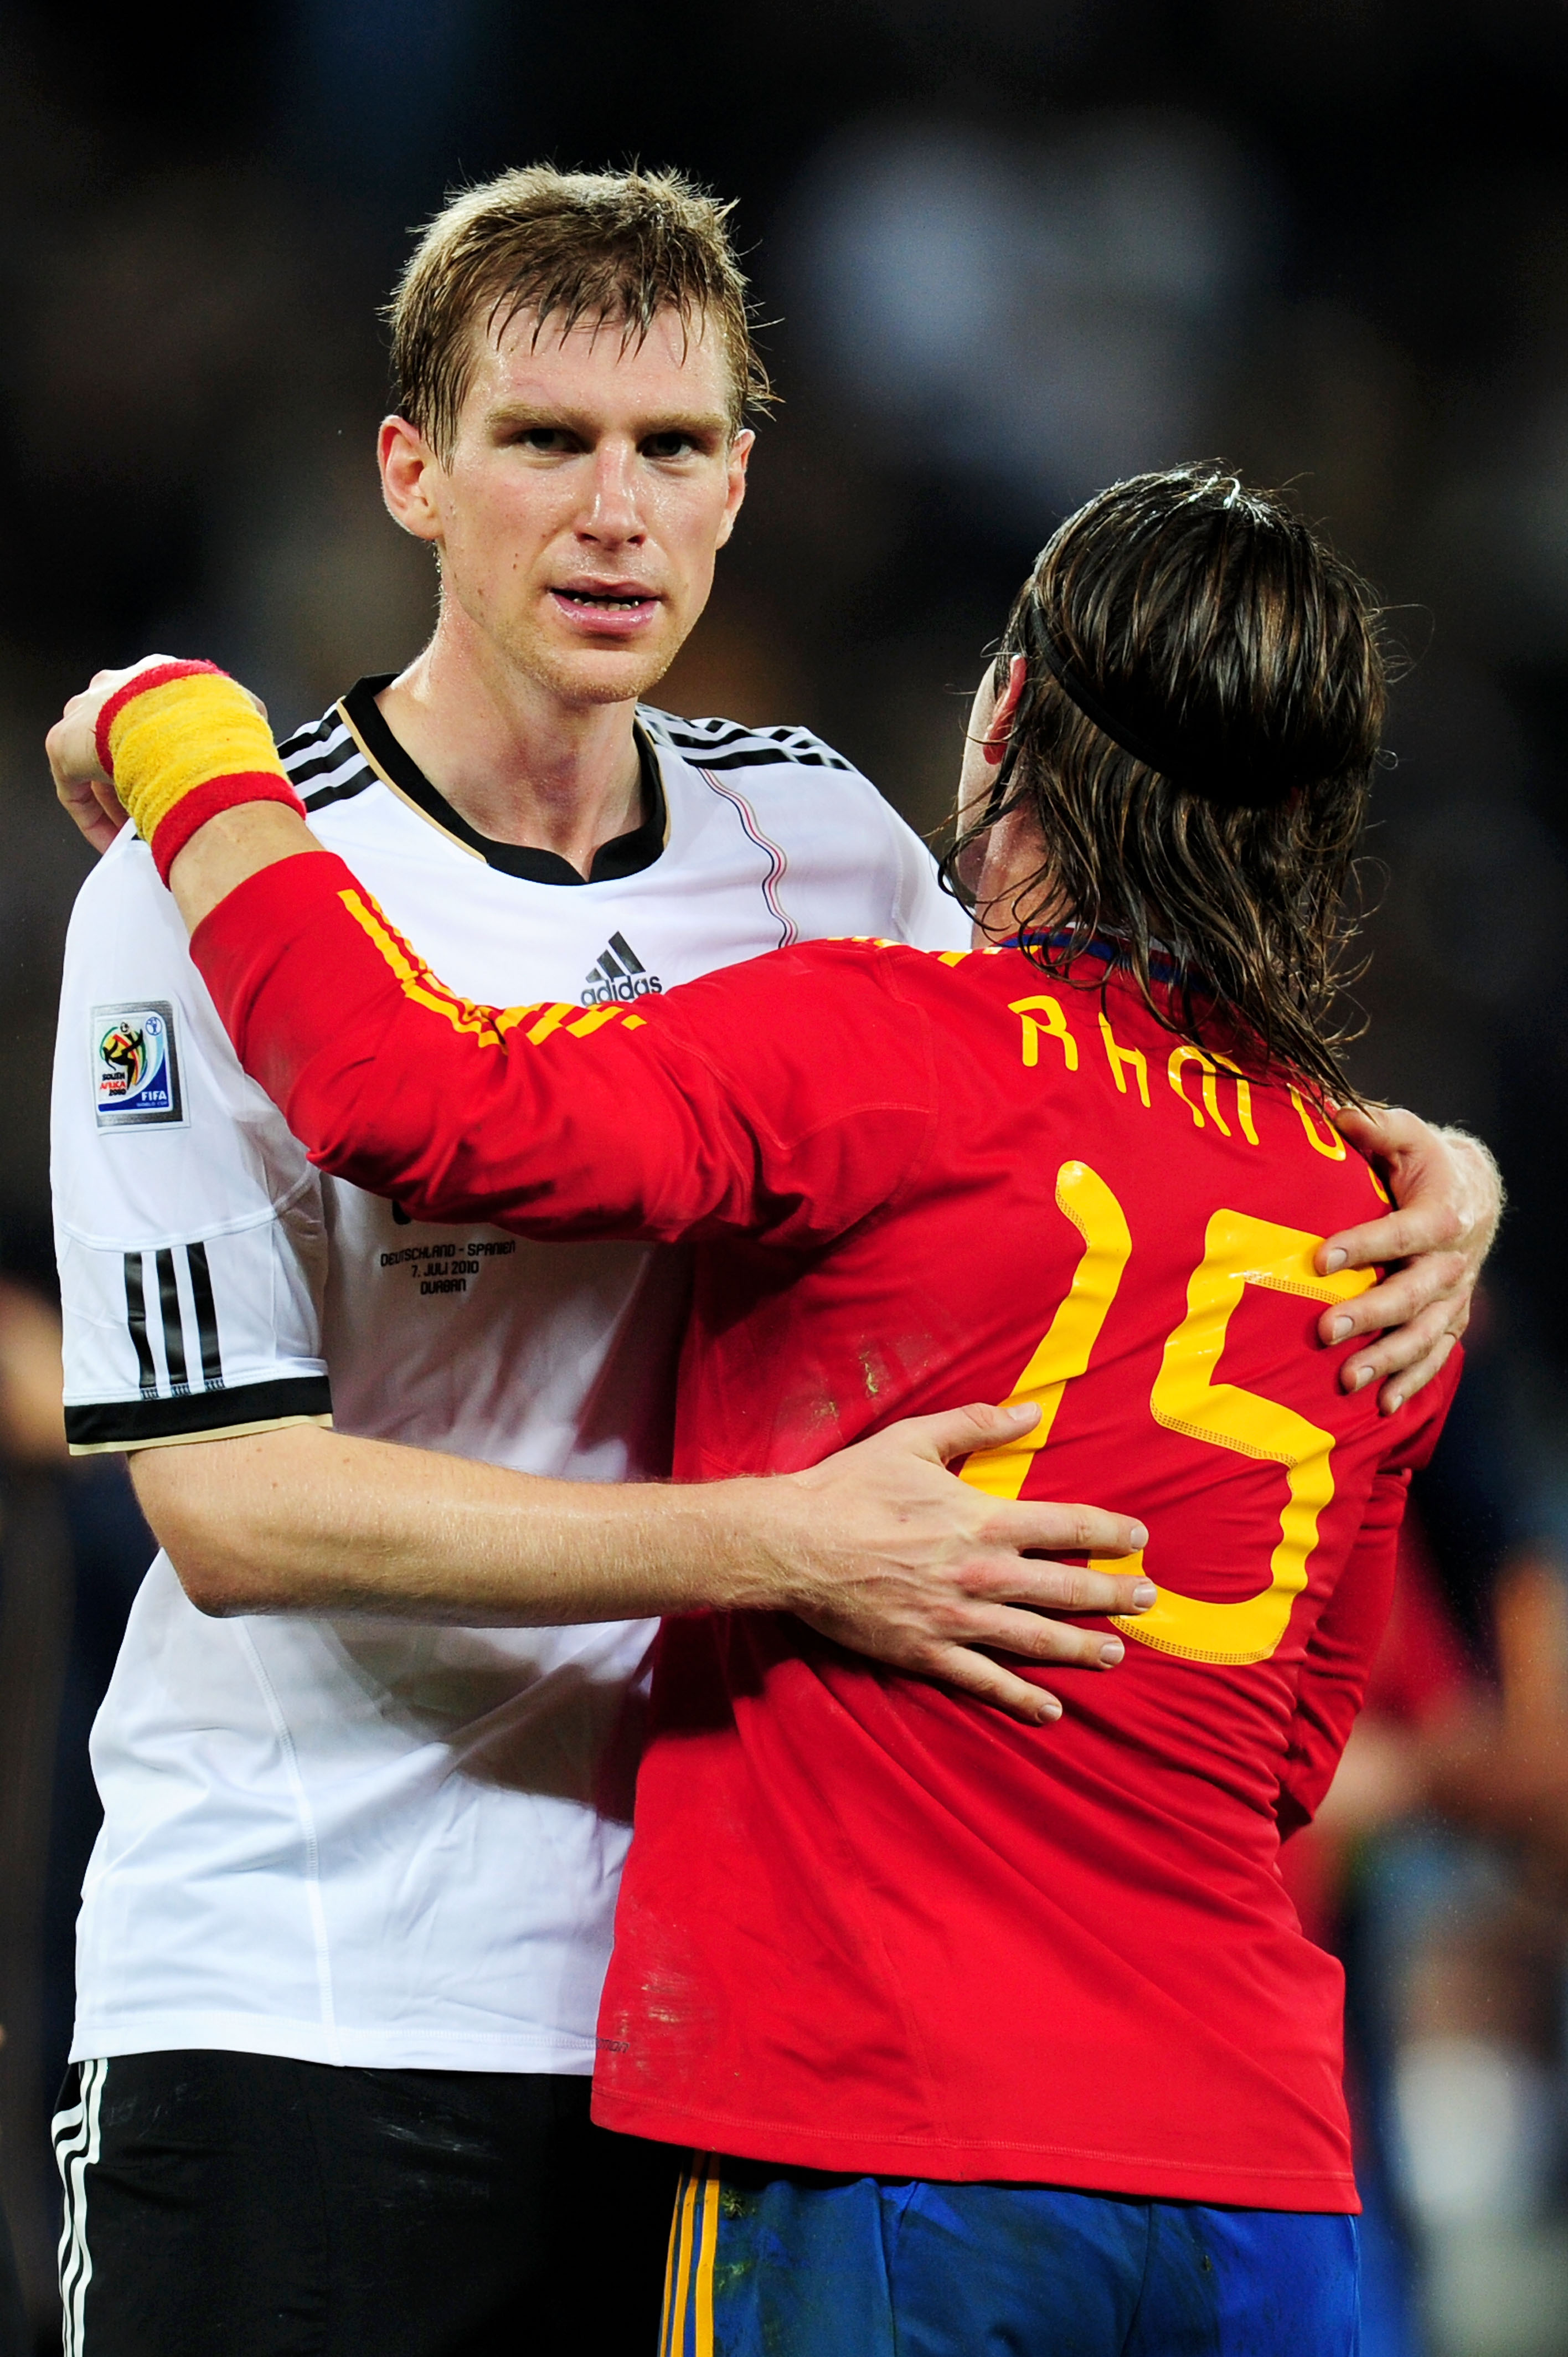 DURBAN, SOUTH AFRICA - JULY 07:  Dejected Per Mertesacker after being knocked out of the tournament is consoled by Sergio Ramos of Spain during the 2010 FIFA World Cup South Africa Semi Final match between Germany and Spain at Durban Stadium on July 7, 20